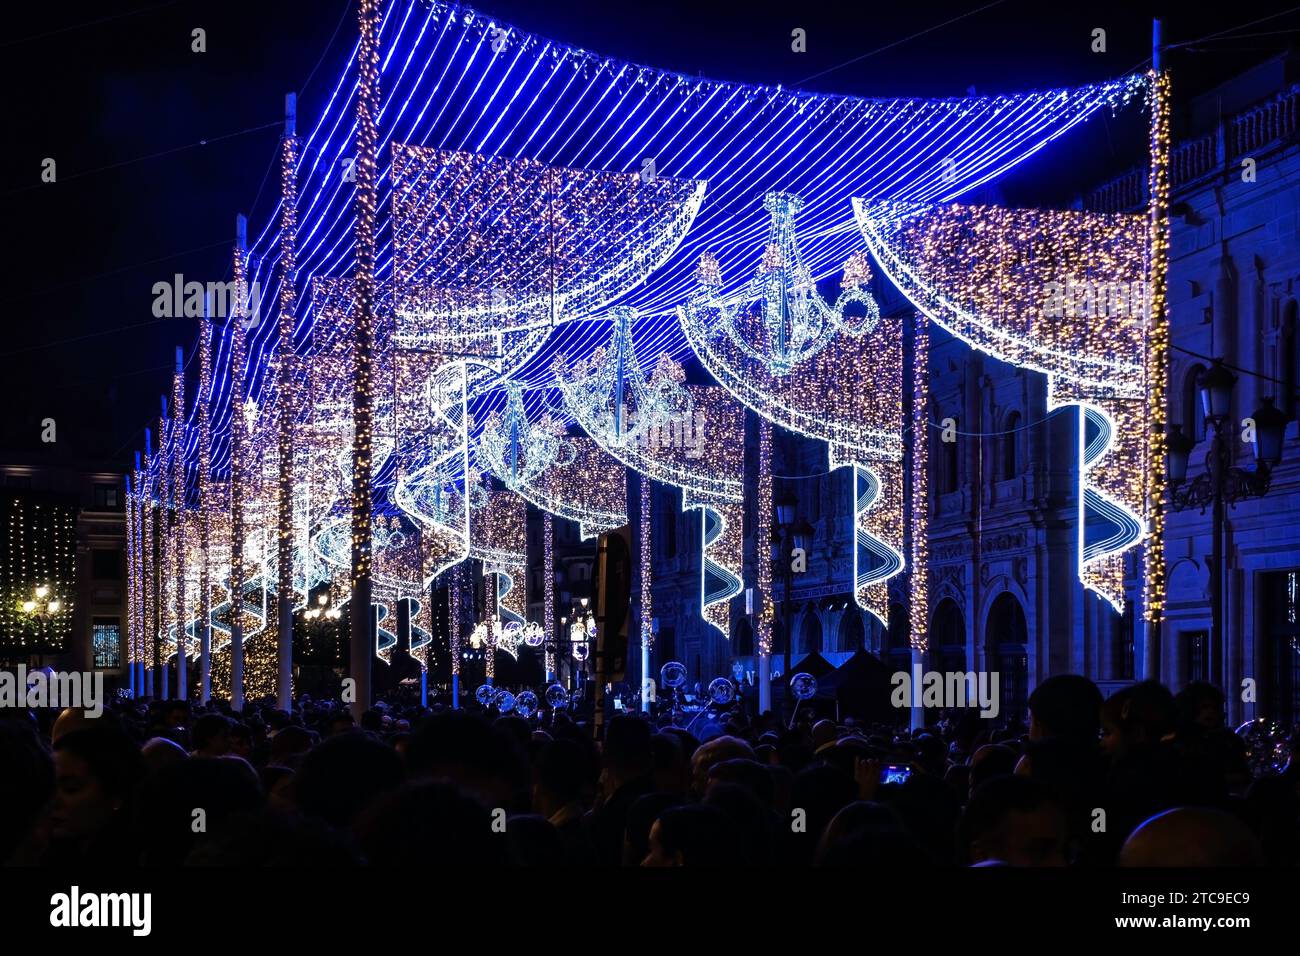 A sea of spectators under a canopy of blue holiday lights, creating a festive urban nightscape. in Seville, spain. Stock Photo